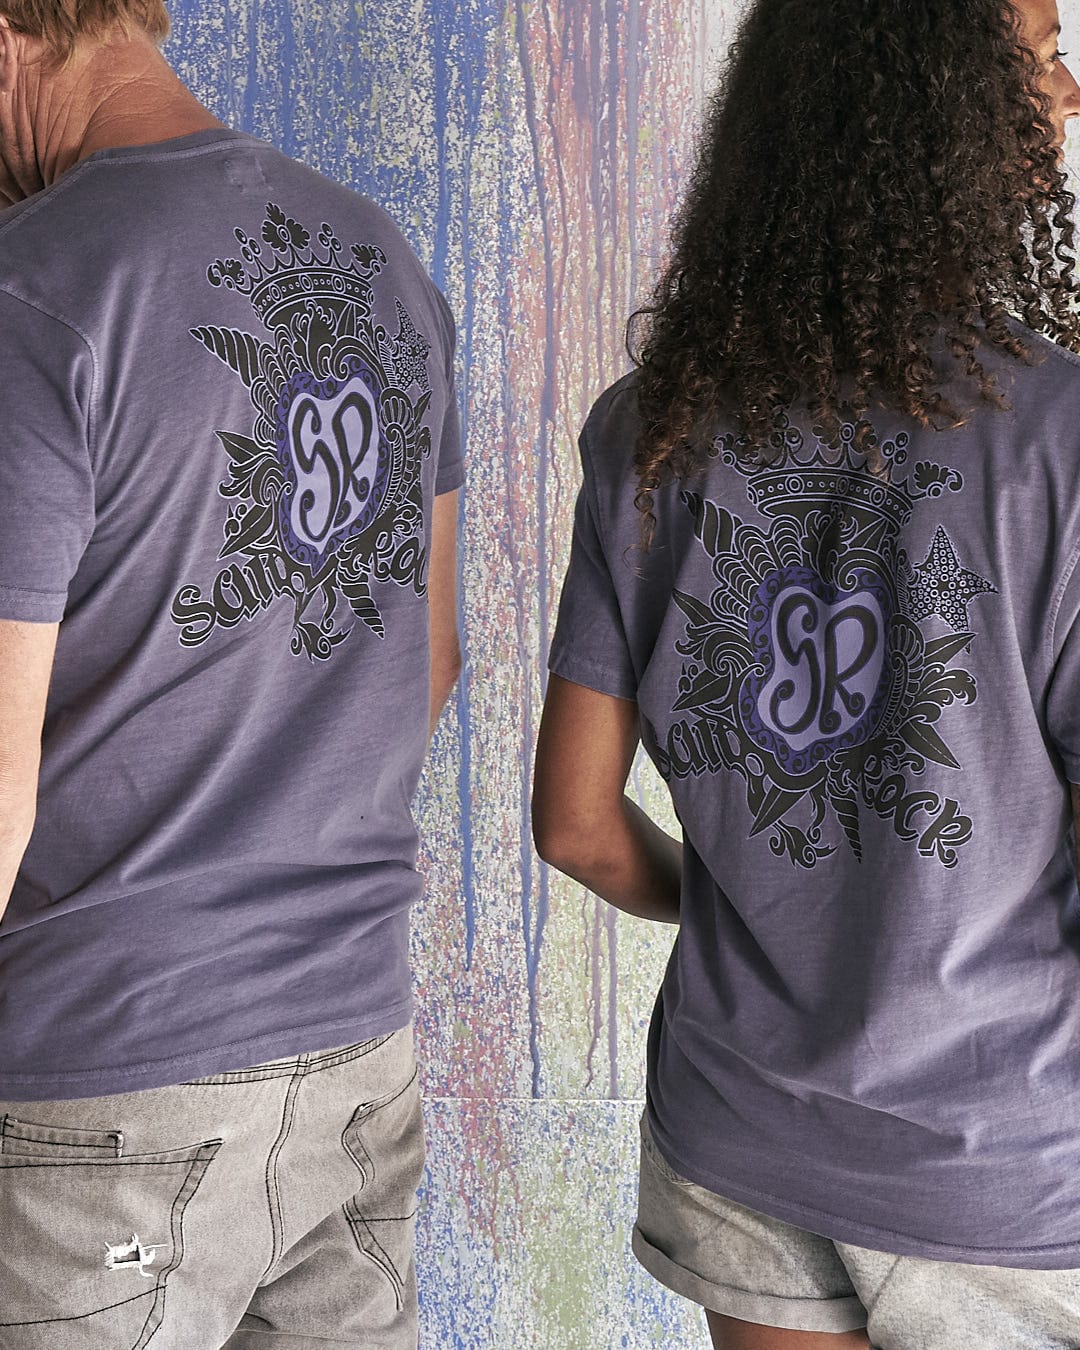 A man and woman wearing a Saltrock - Limited Edition 35 Years T-Shirt.